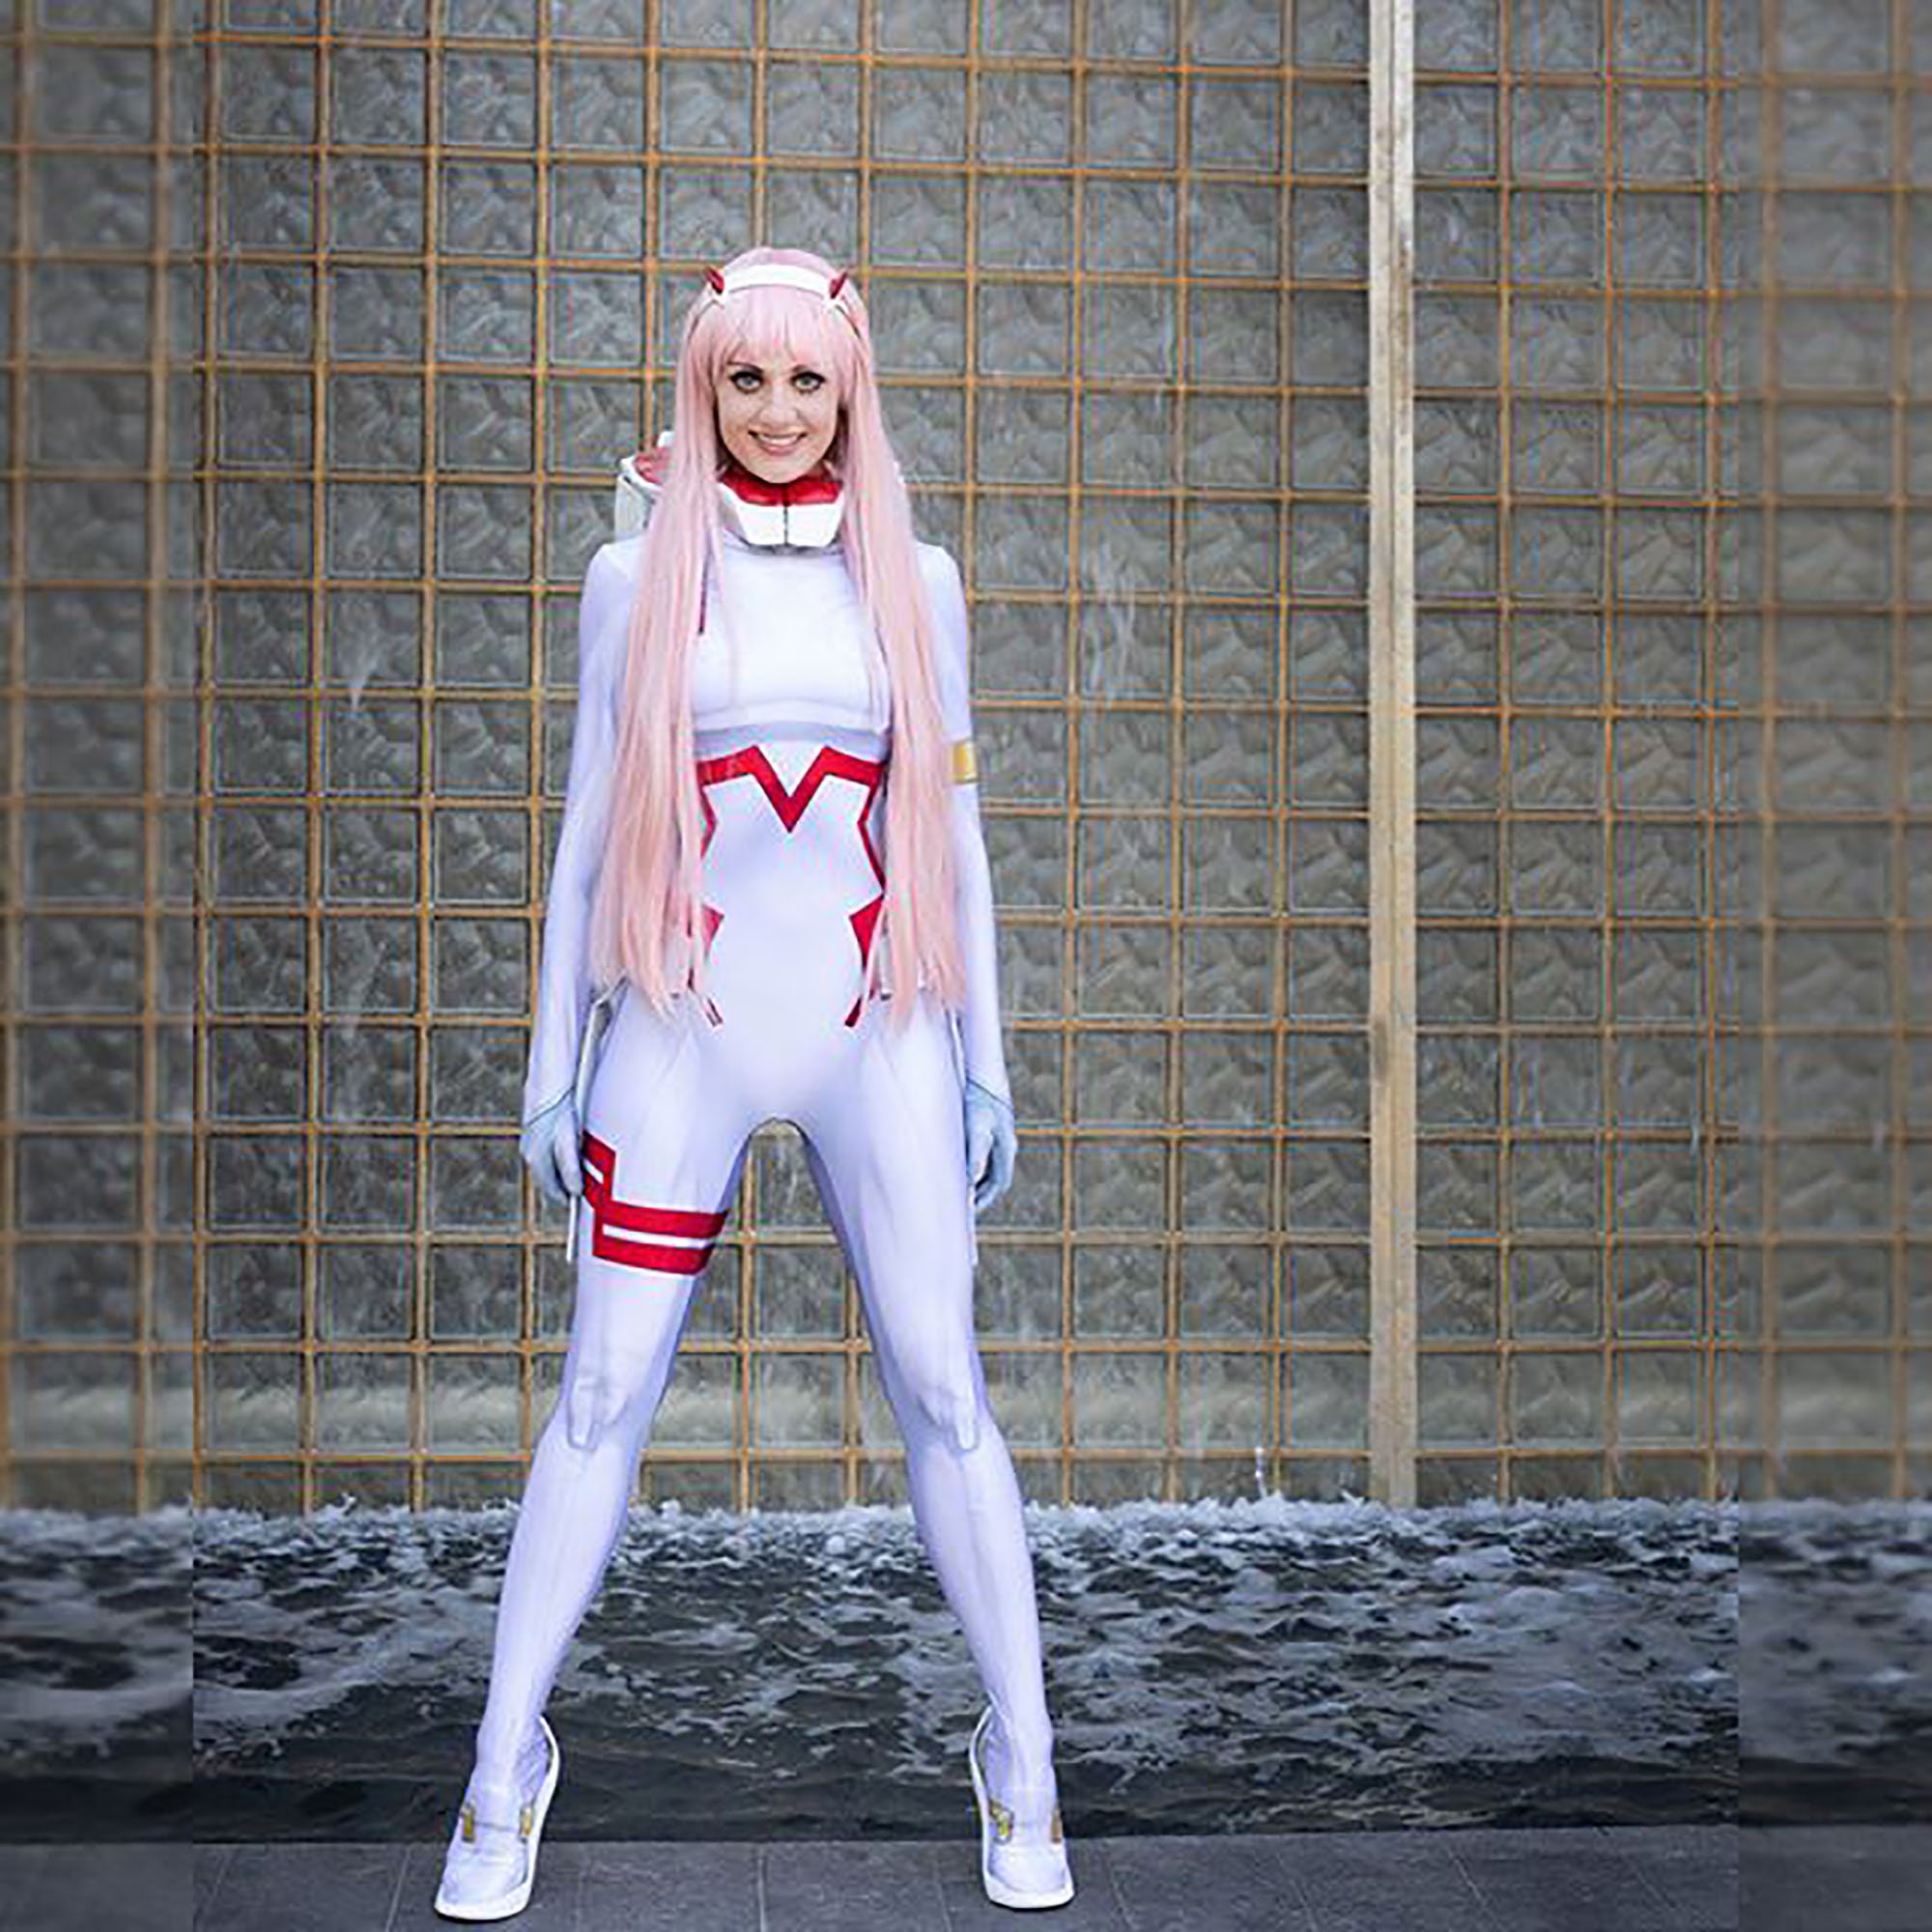 Darling In The Franxx Cosplay